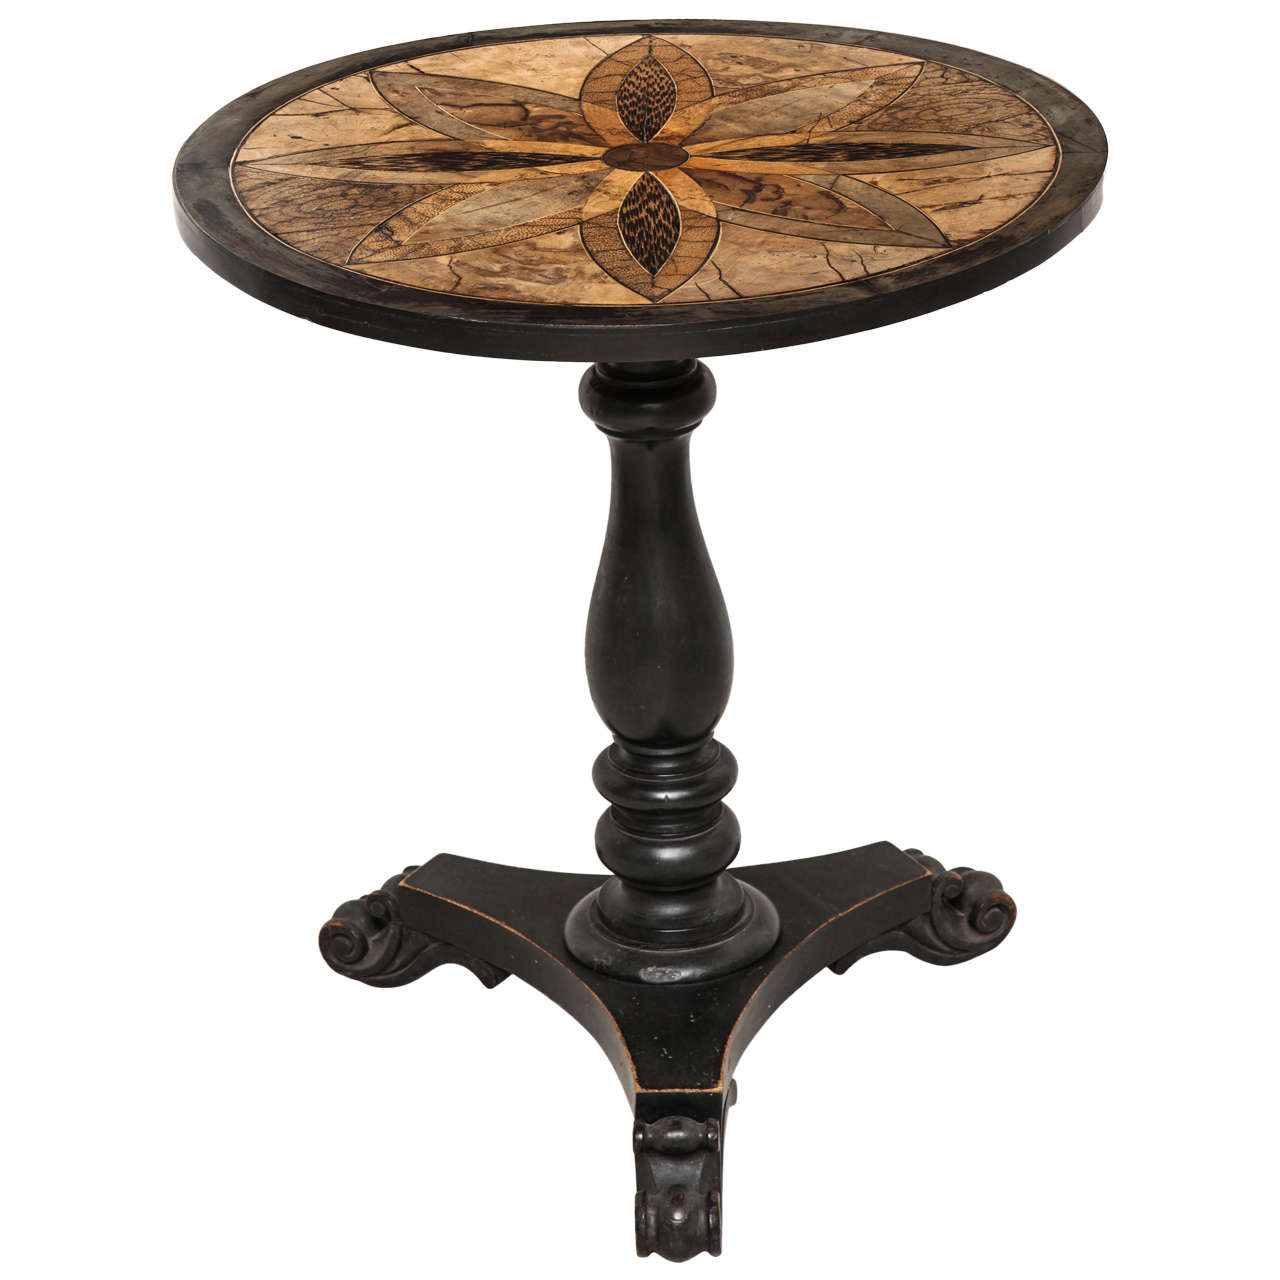 Anglo-Indian Specimen Wood inlaid Table